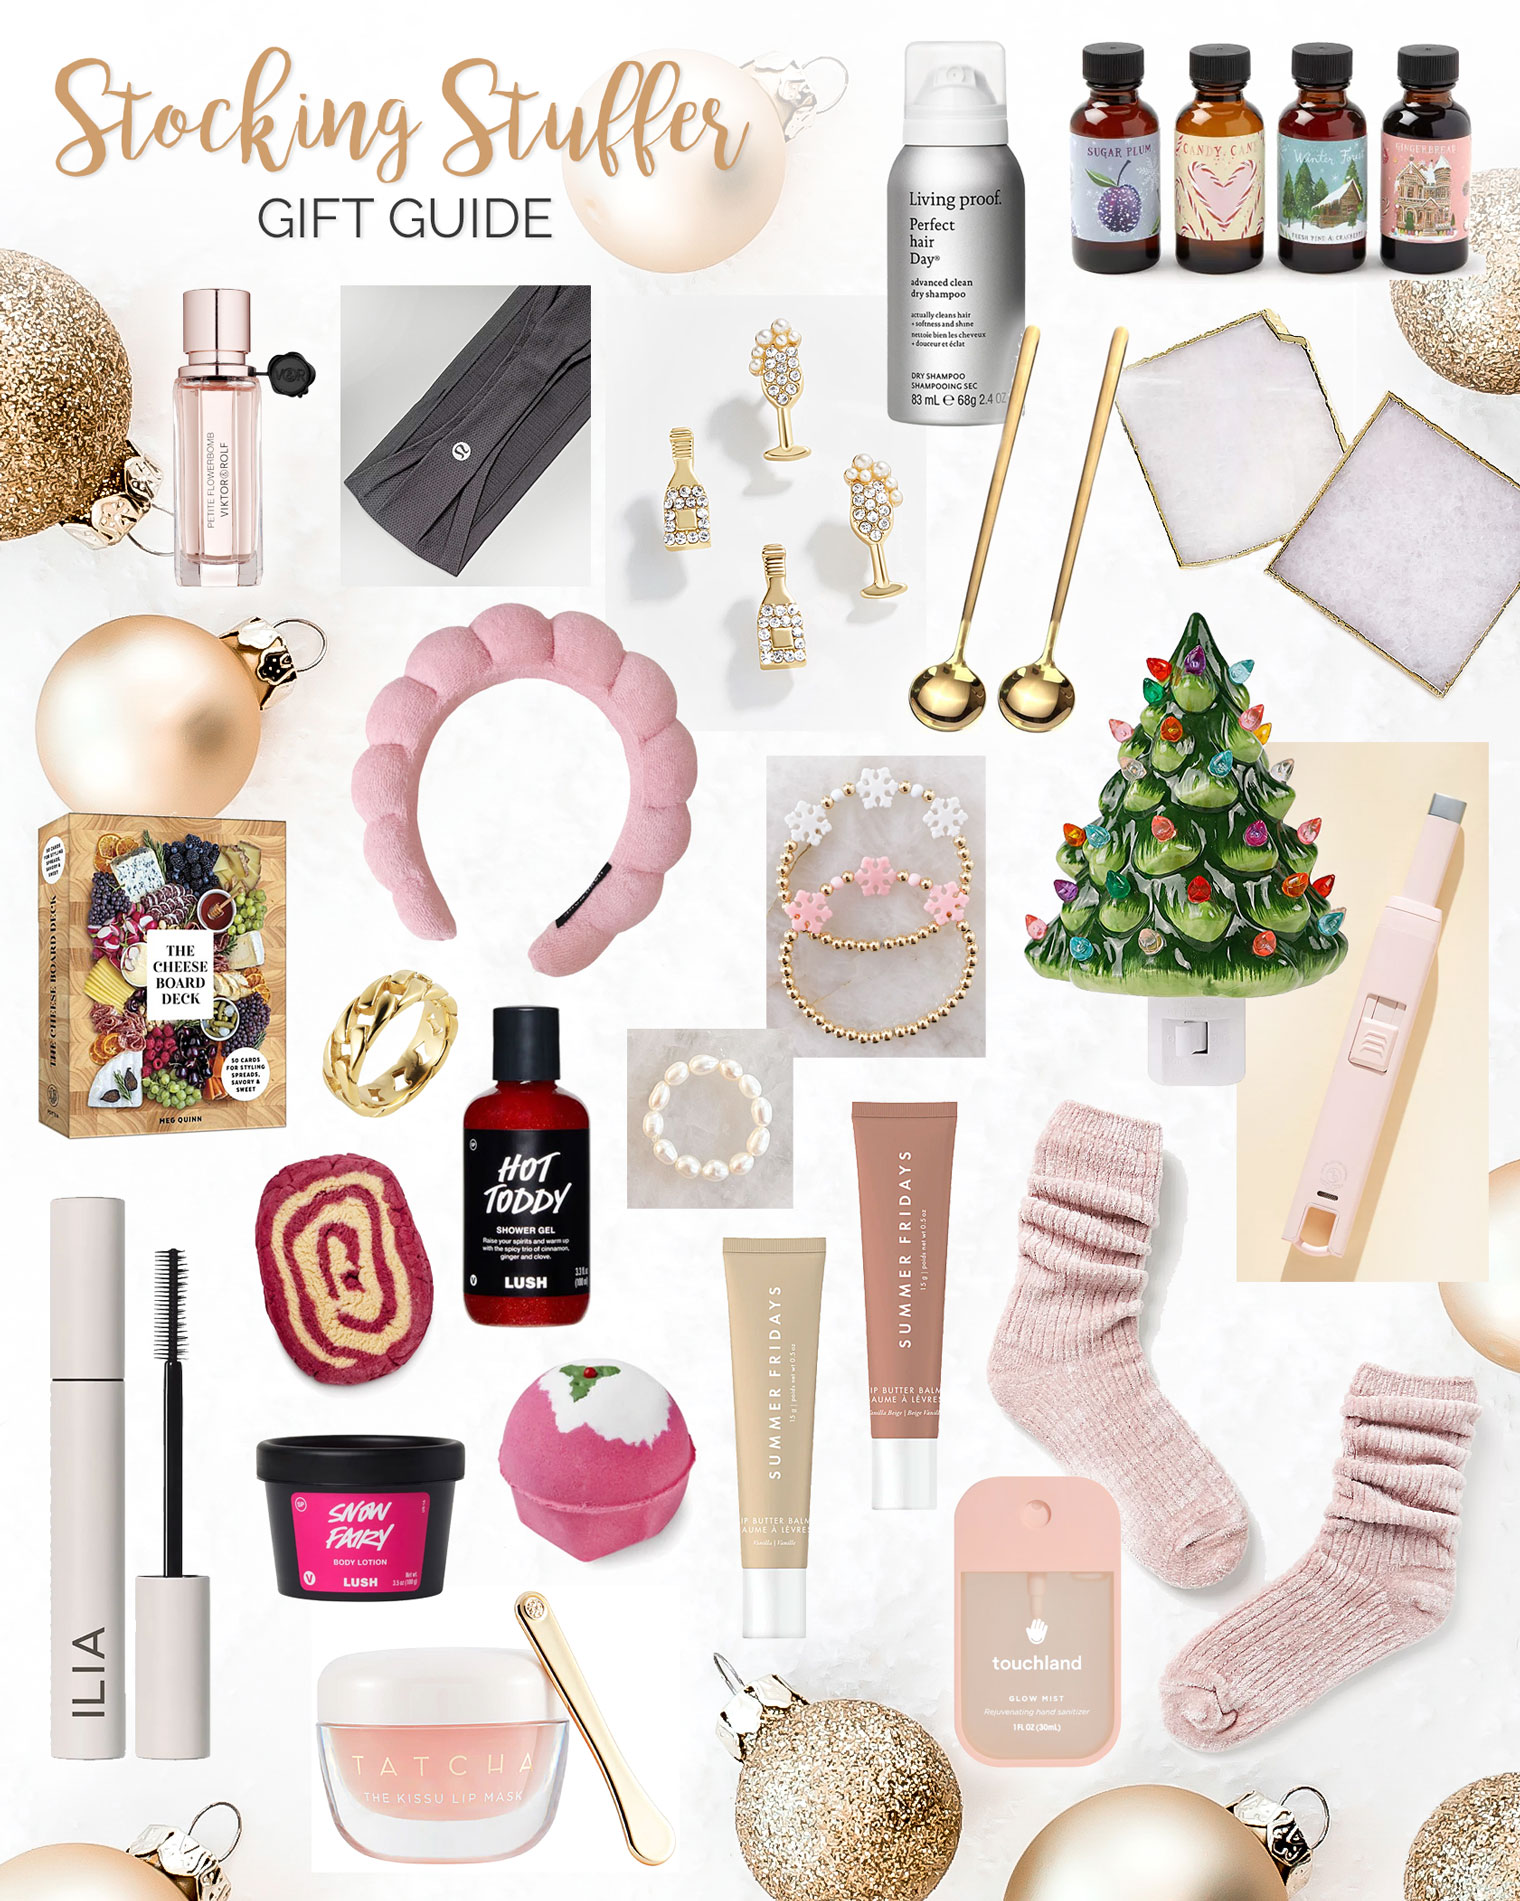 50 Stocking Stuffers for Mom She'll Love - Parade